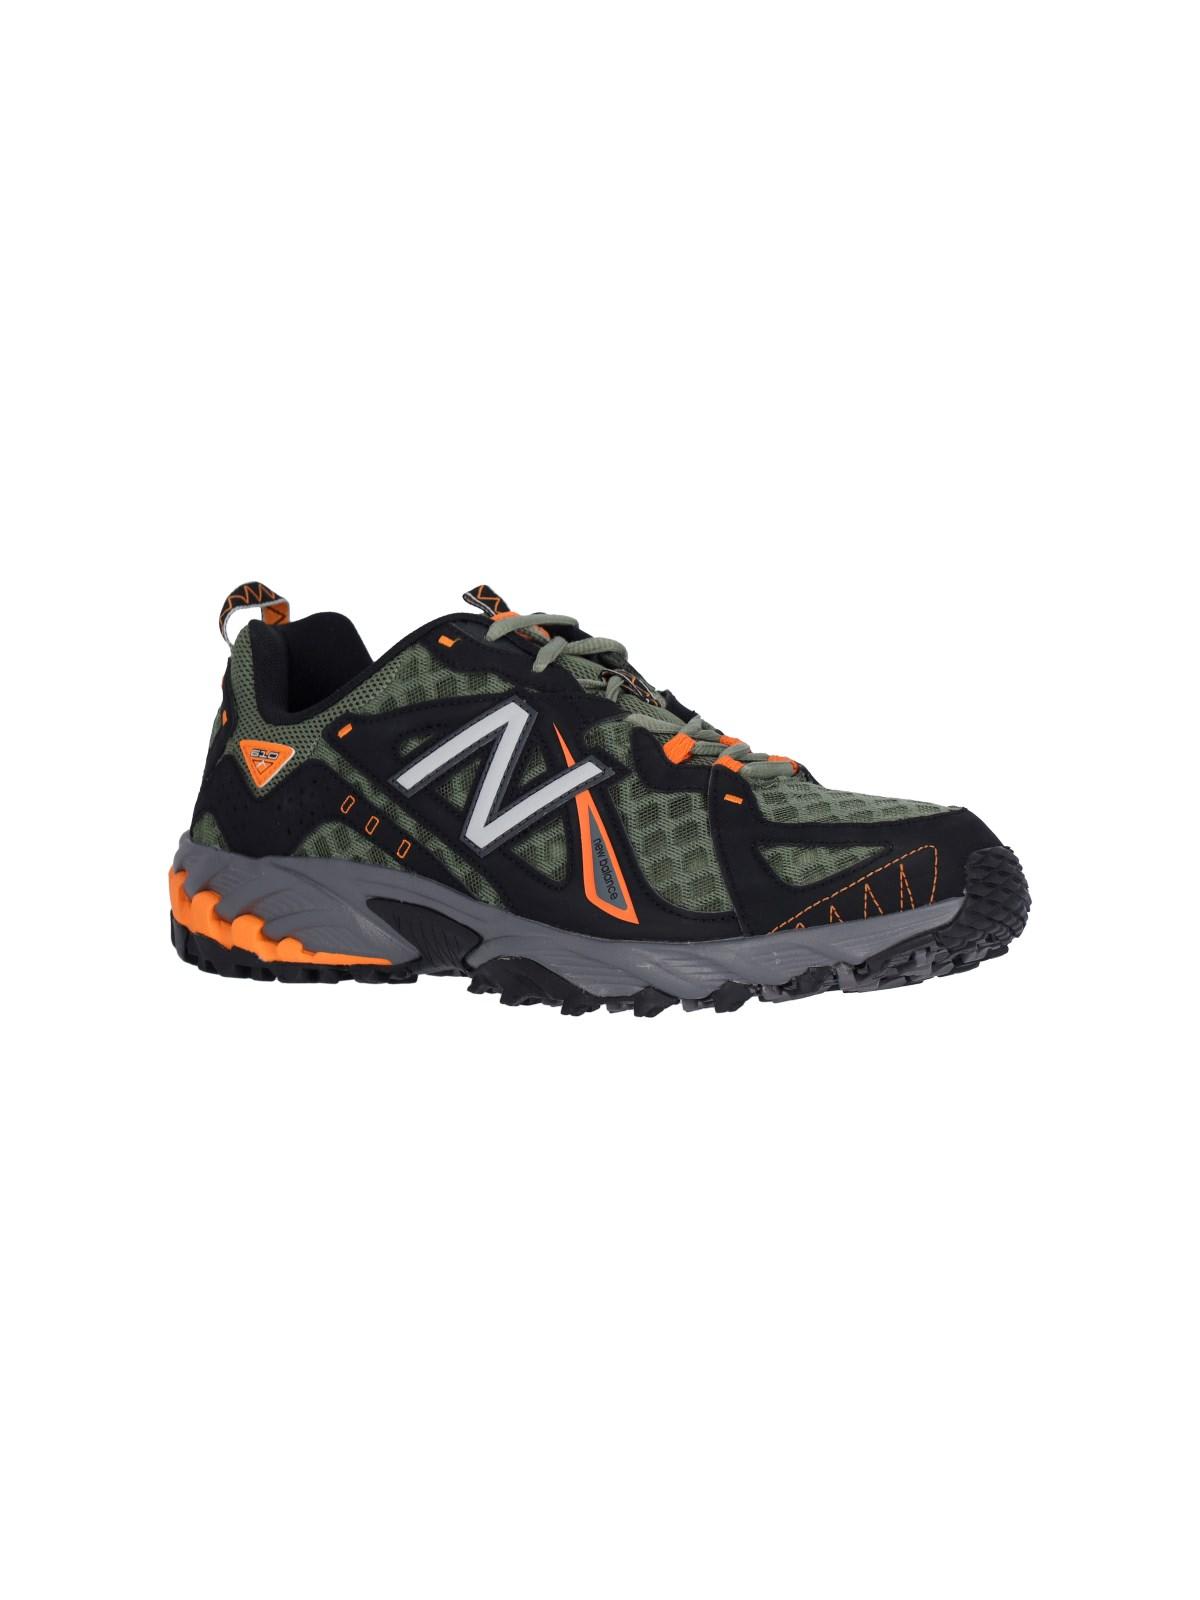 Shop New Balance 610v1 Sneakers